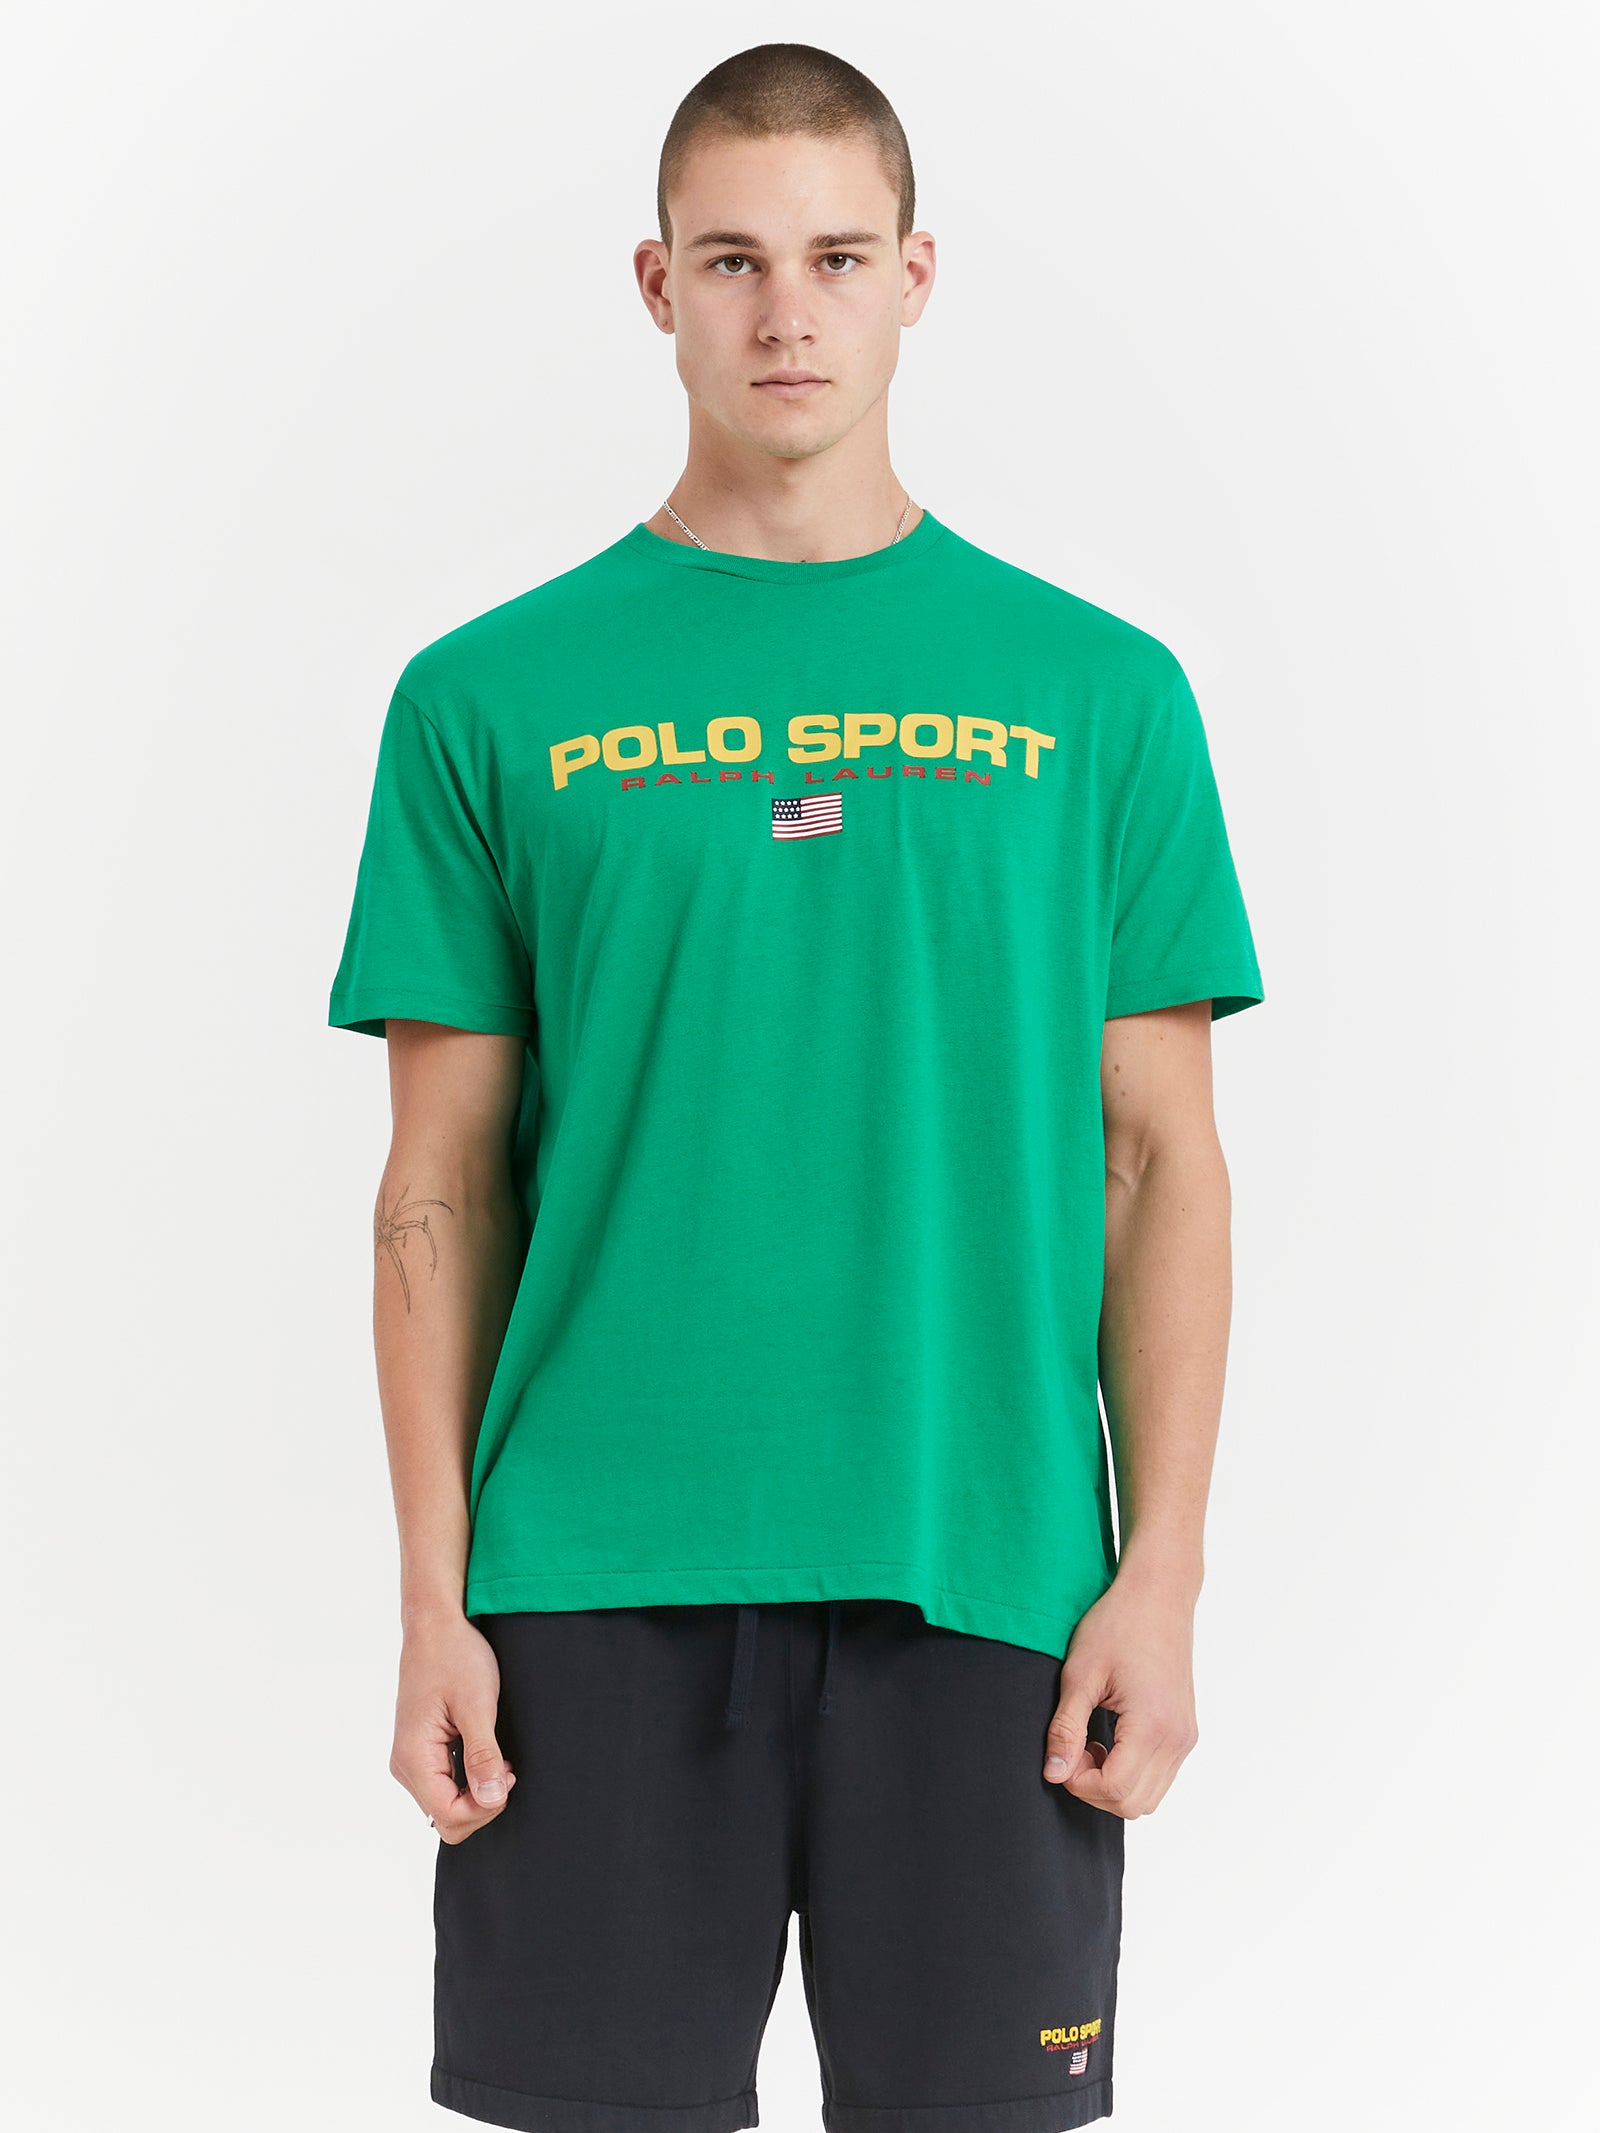 Classic Fit Polo Sport Jersey T-Shirt in Stem